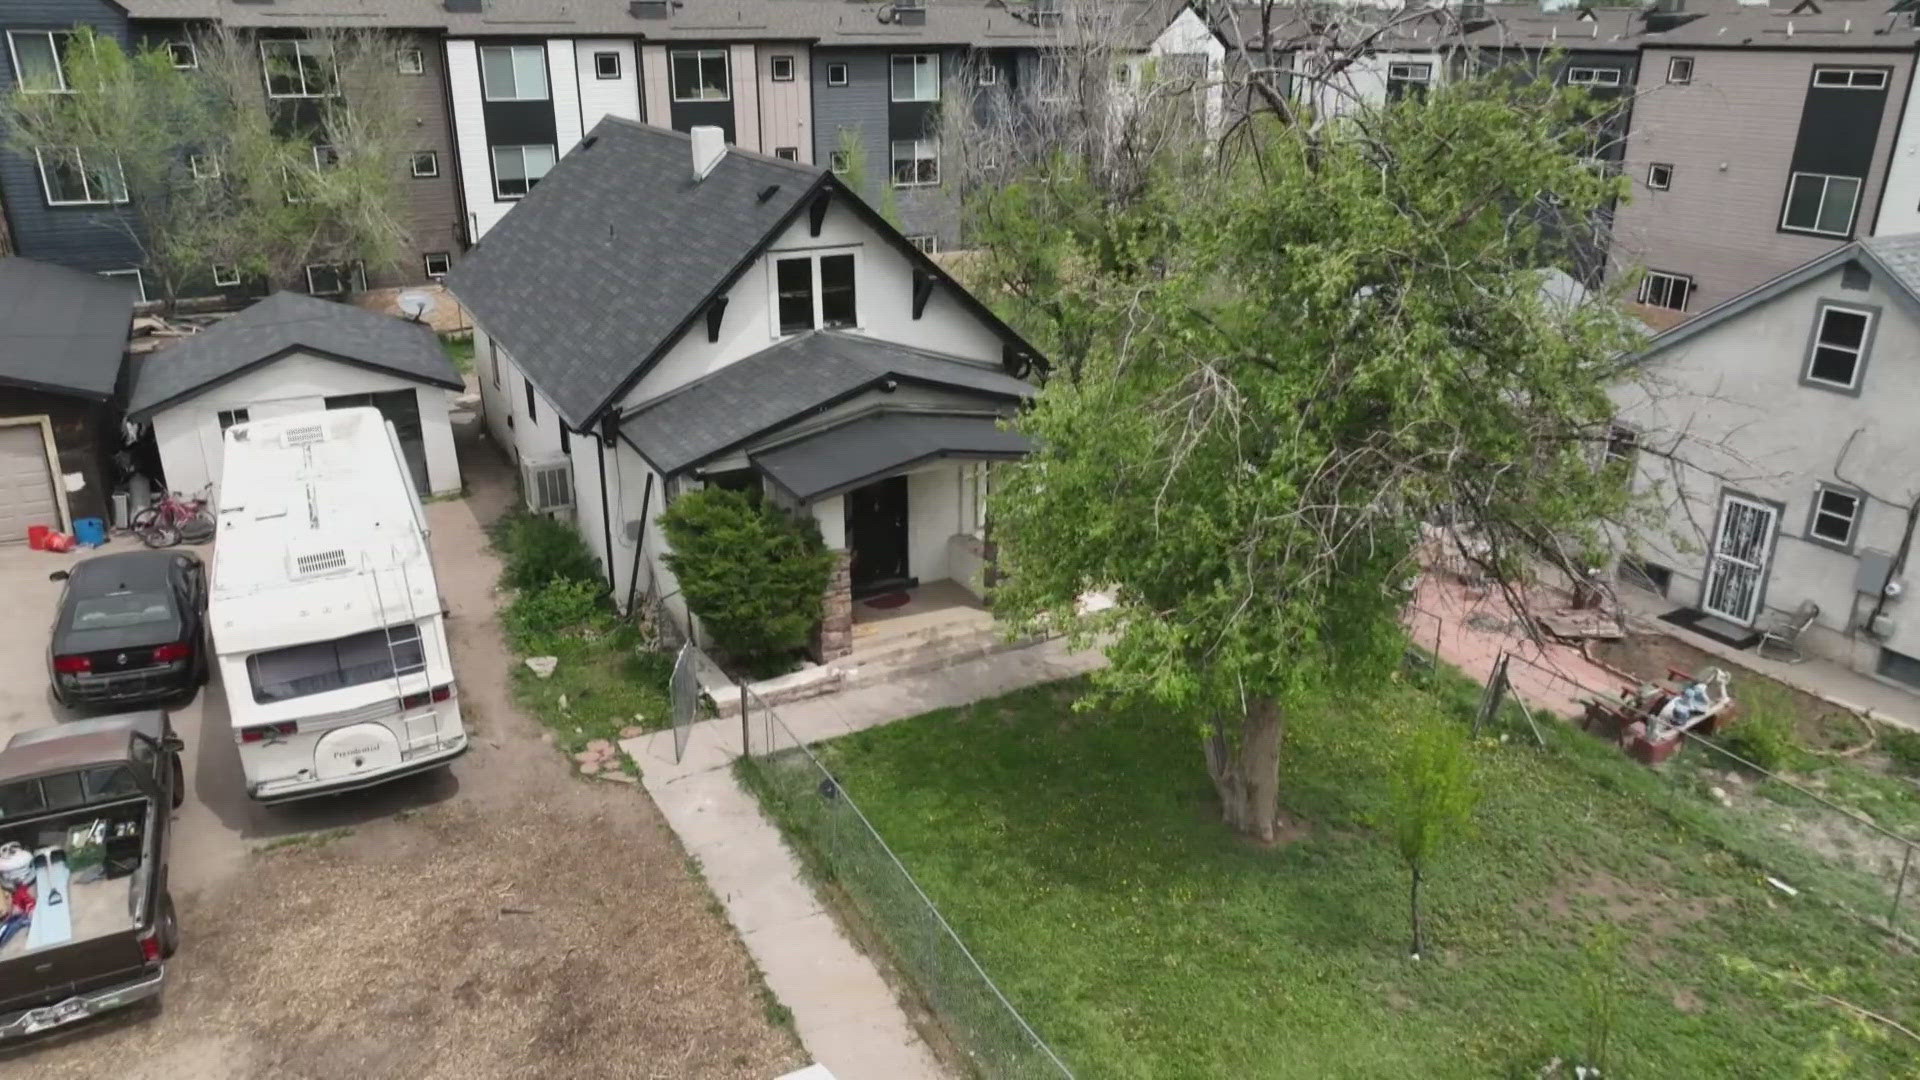 9NEWS investigates a case of a woman living rent-free inside a Lakewood home after the owner died. The owner’s granddaughter may be the rightful heir.